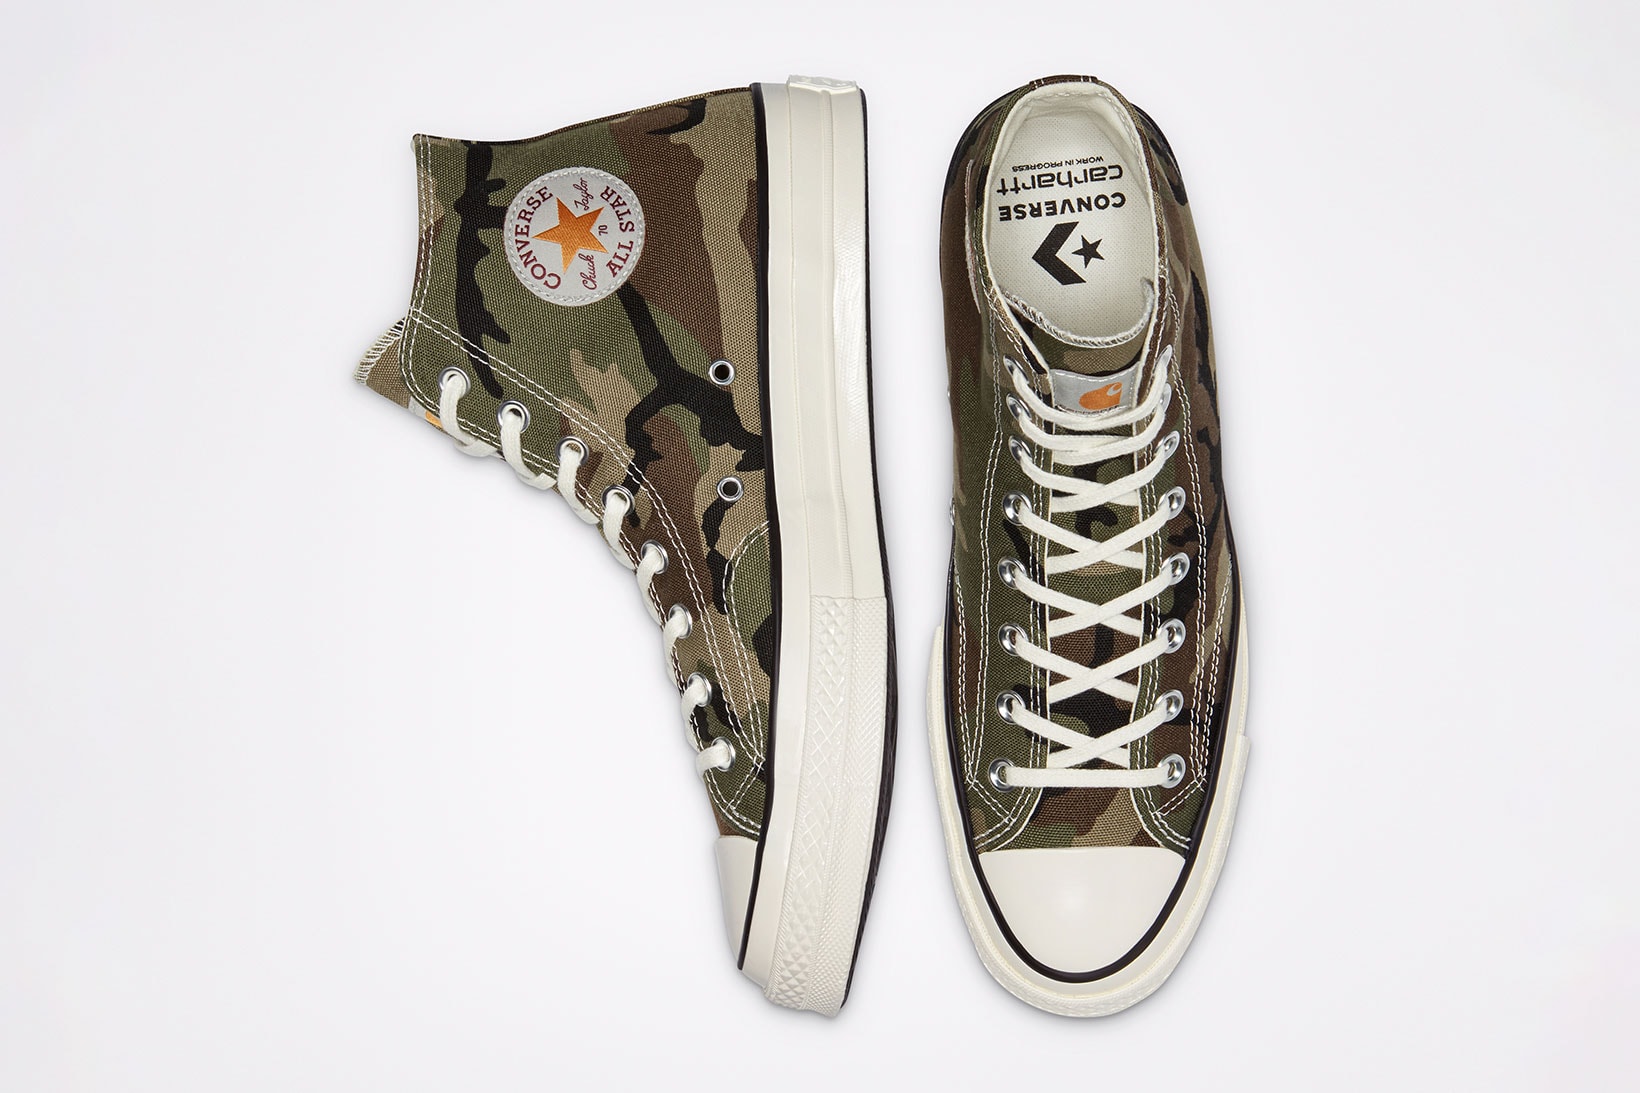 carhartt wip converse chuck 70 icons collaboration sneakers camouflage pattern details top toebox insoles